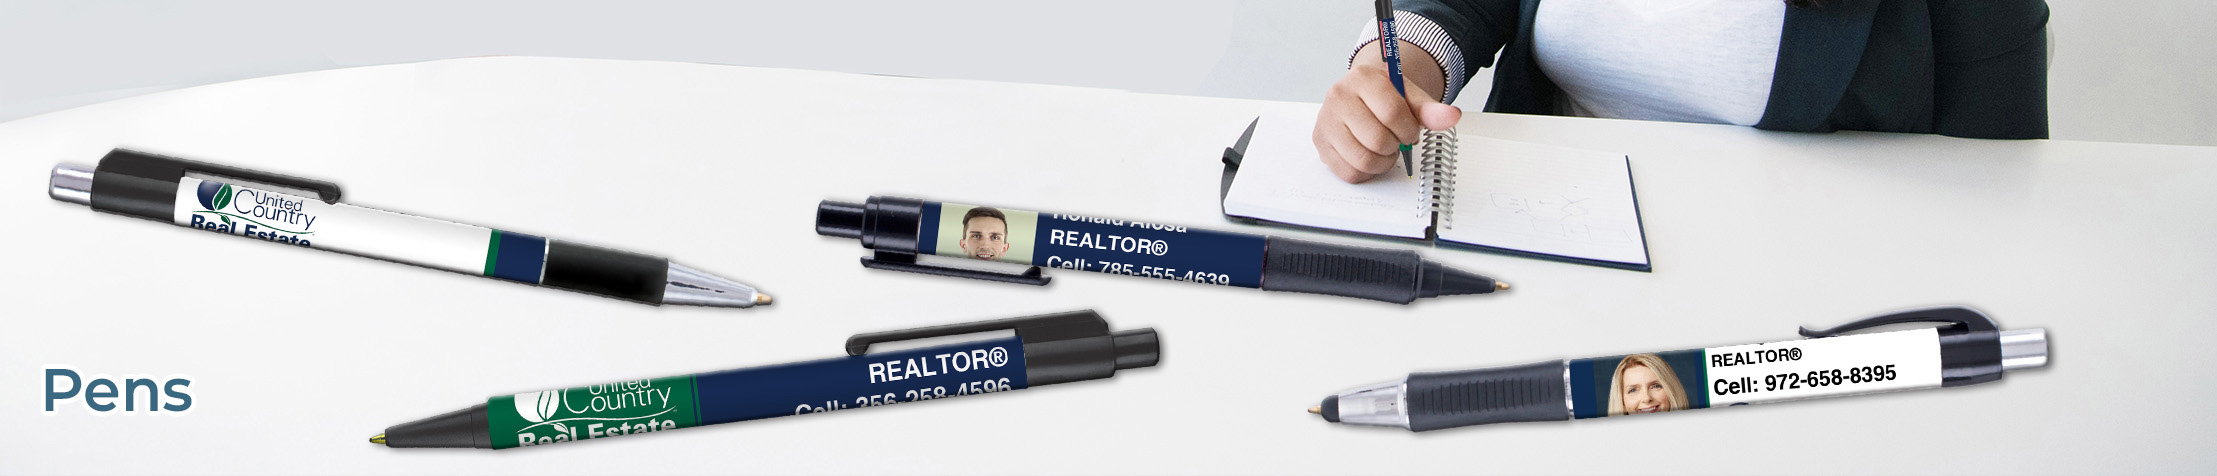 United Country Real Estate Personalized Pens - promotional products: Grip Write Pens, Colorama Pens, Vision Touch Pens, and Colorama Grip Pens | BestPrintBuy.com